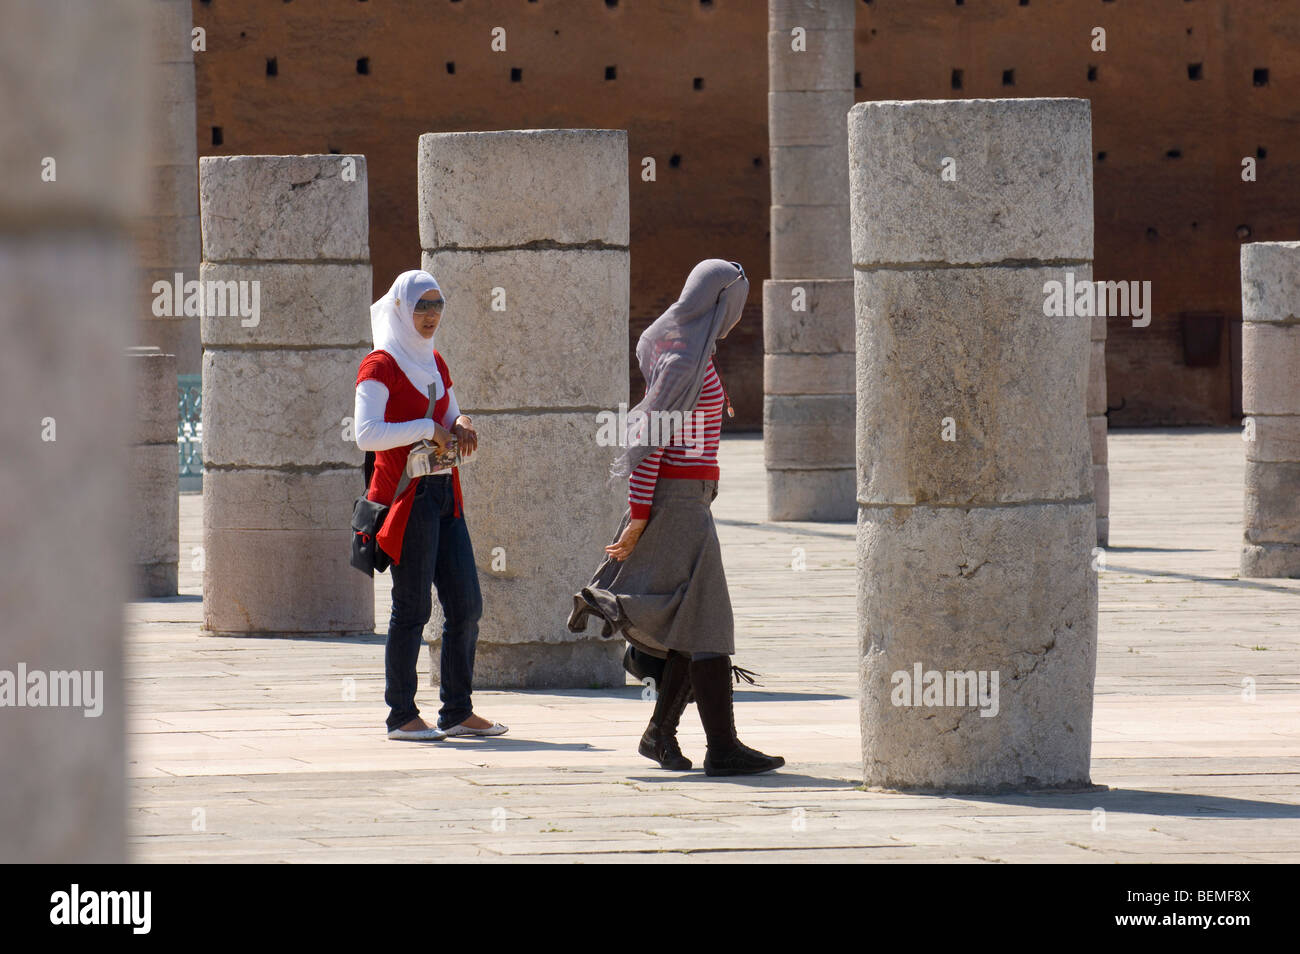 Visitors walk among the columns of the prayer hall of The Unfinished Hassan Mosque, Rabat, Morocco, Africa. Stock Photo